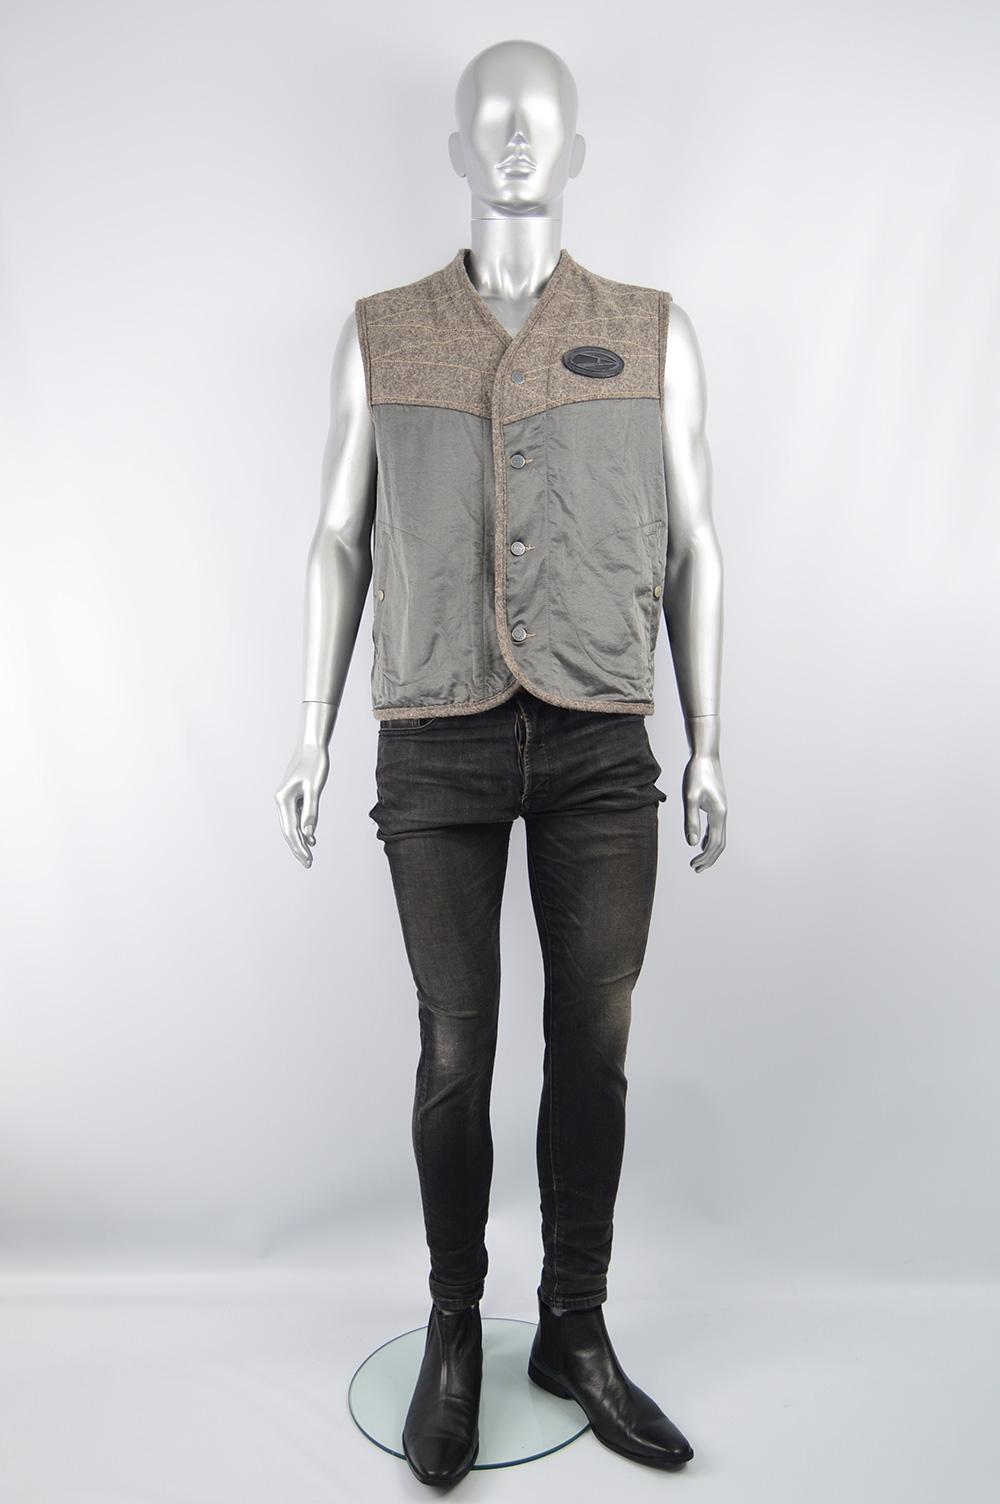 Size: Marked L but this gives an intentional loose fit. Please check measurements. 
Chest - 48”  / 122cm
Waist - 44” / 112cm
Length (Shoulder to Hem) - 23” / 58cm

An amazing vintage men's gilet / sleeveless jacket from the 90s by iconic British